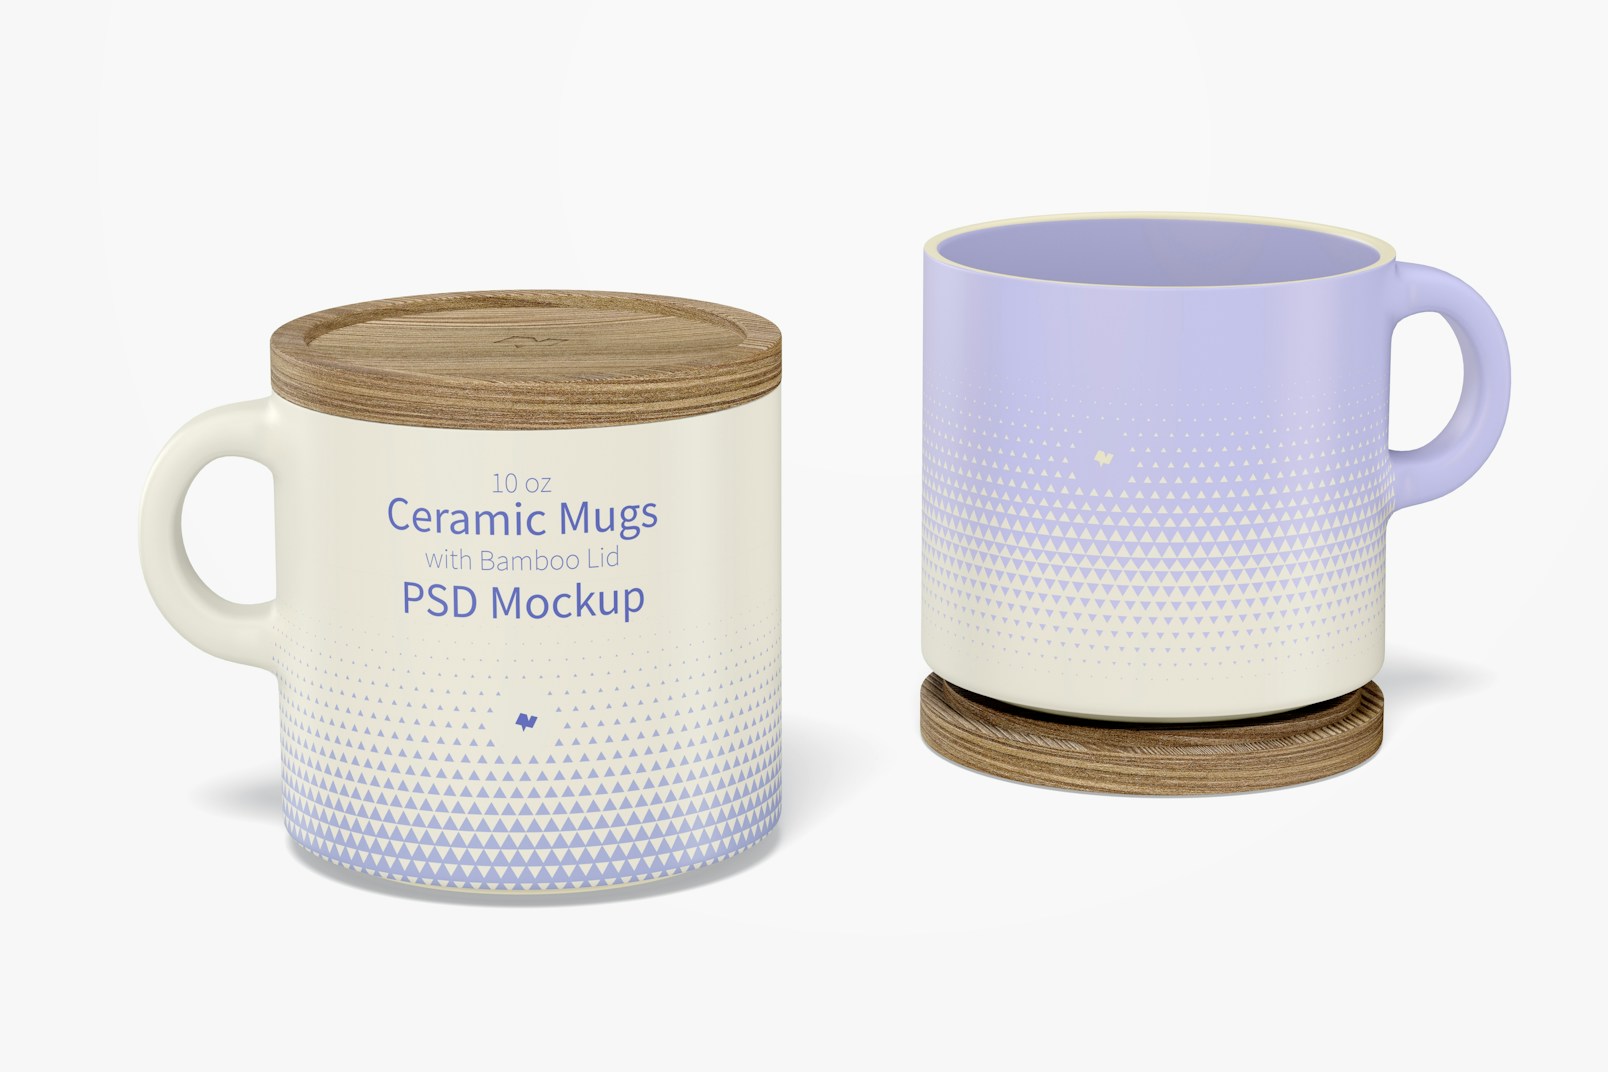 10 oz Ceramic Mugs with Bamboo Lid Mockup, Opened and Closed